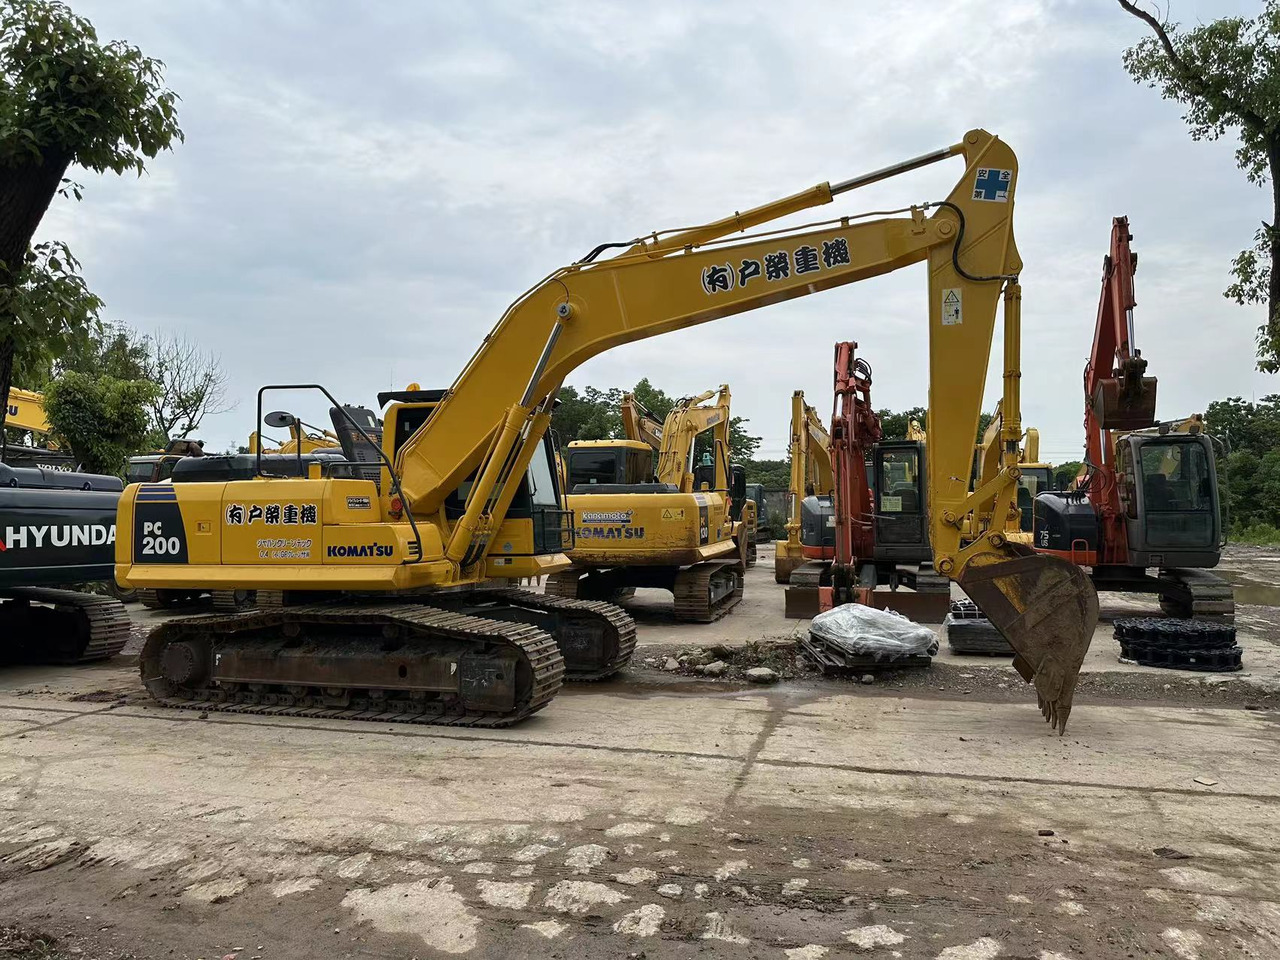 Kettenbagger High quality Good Performance KOMATSU PC200-8N1 with original design and strong power low working hours good condition on sale: das Bild 5